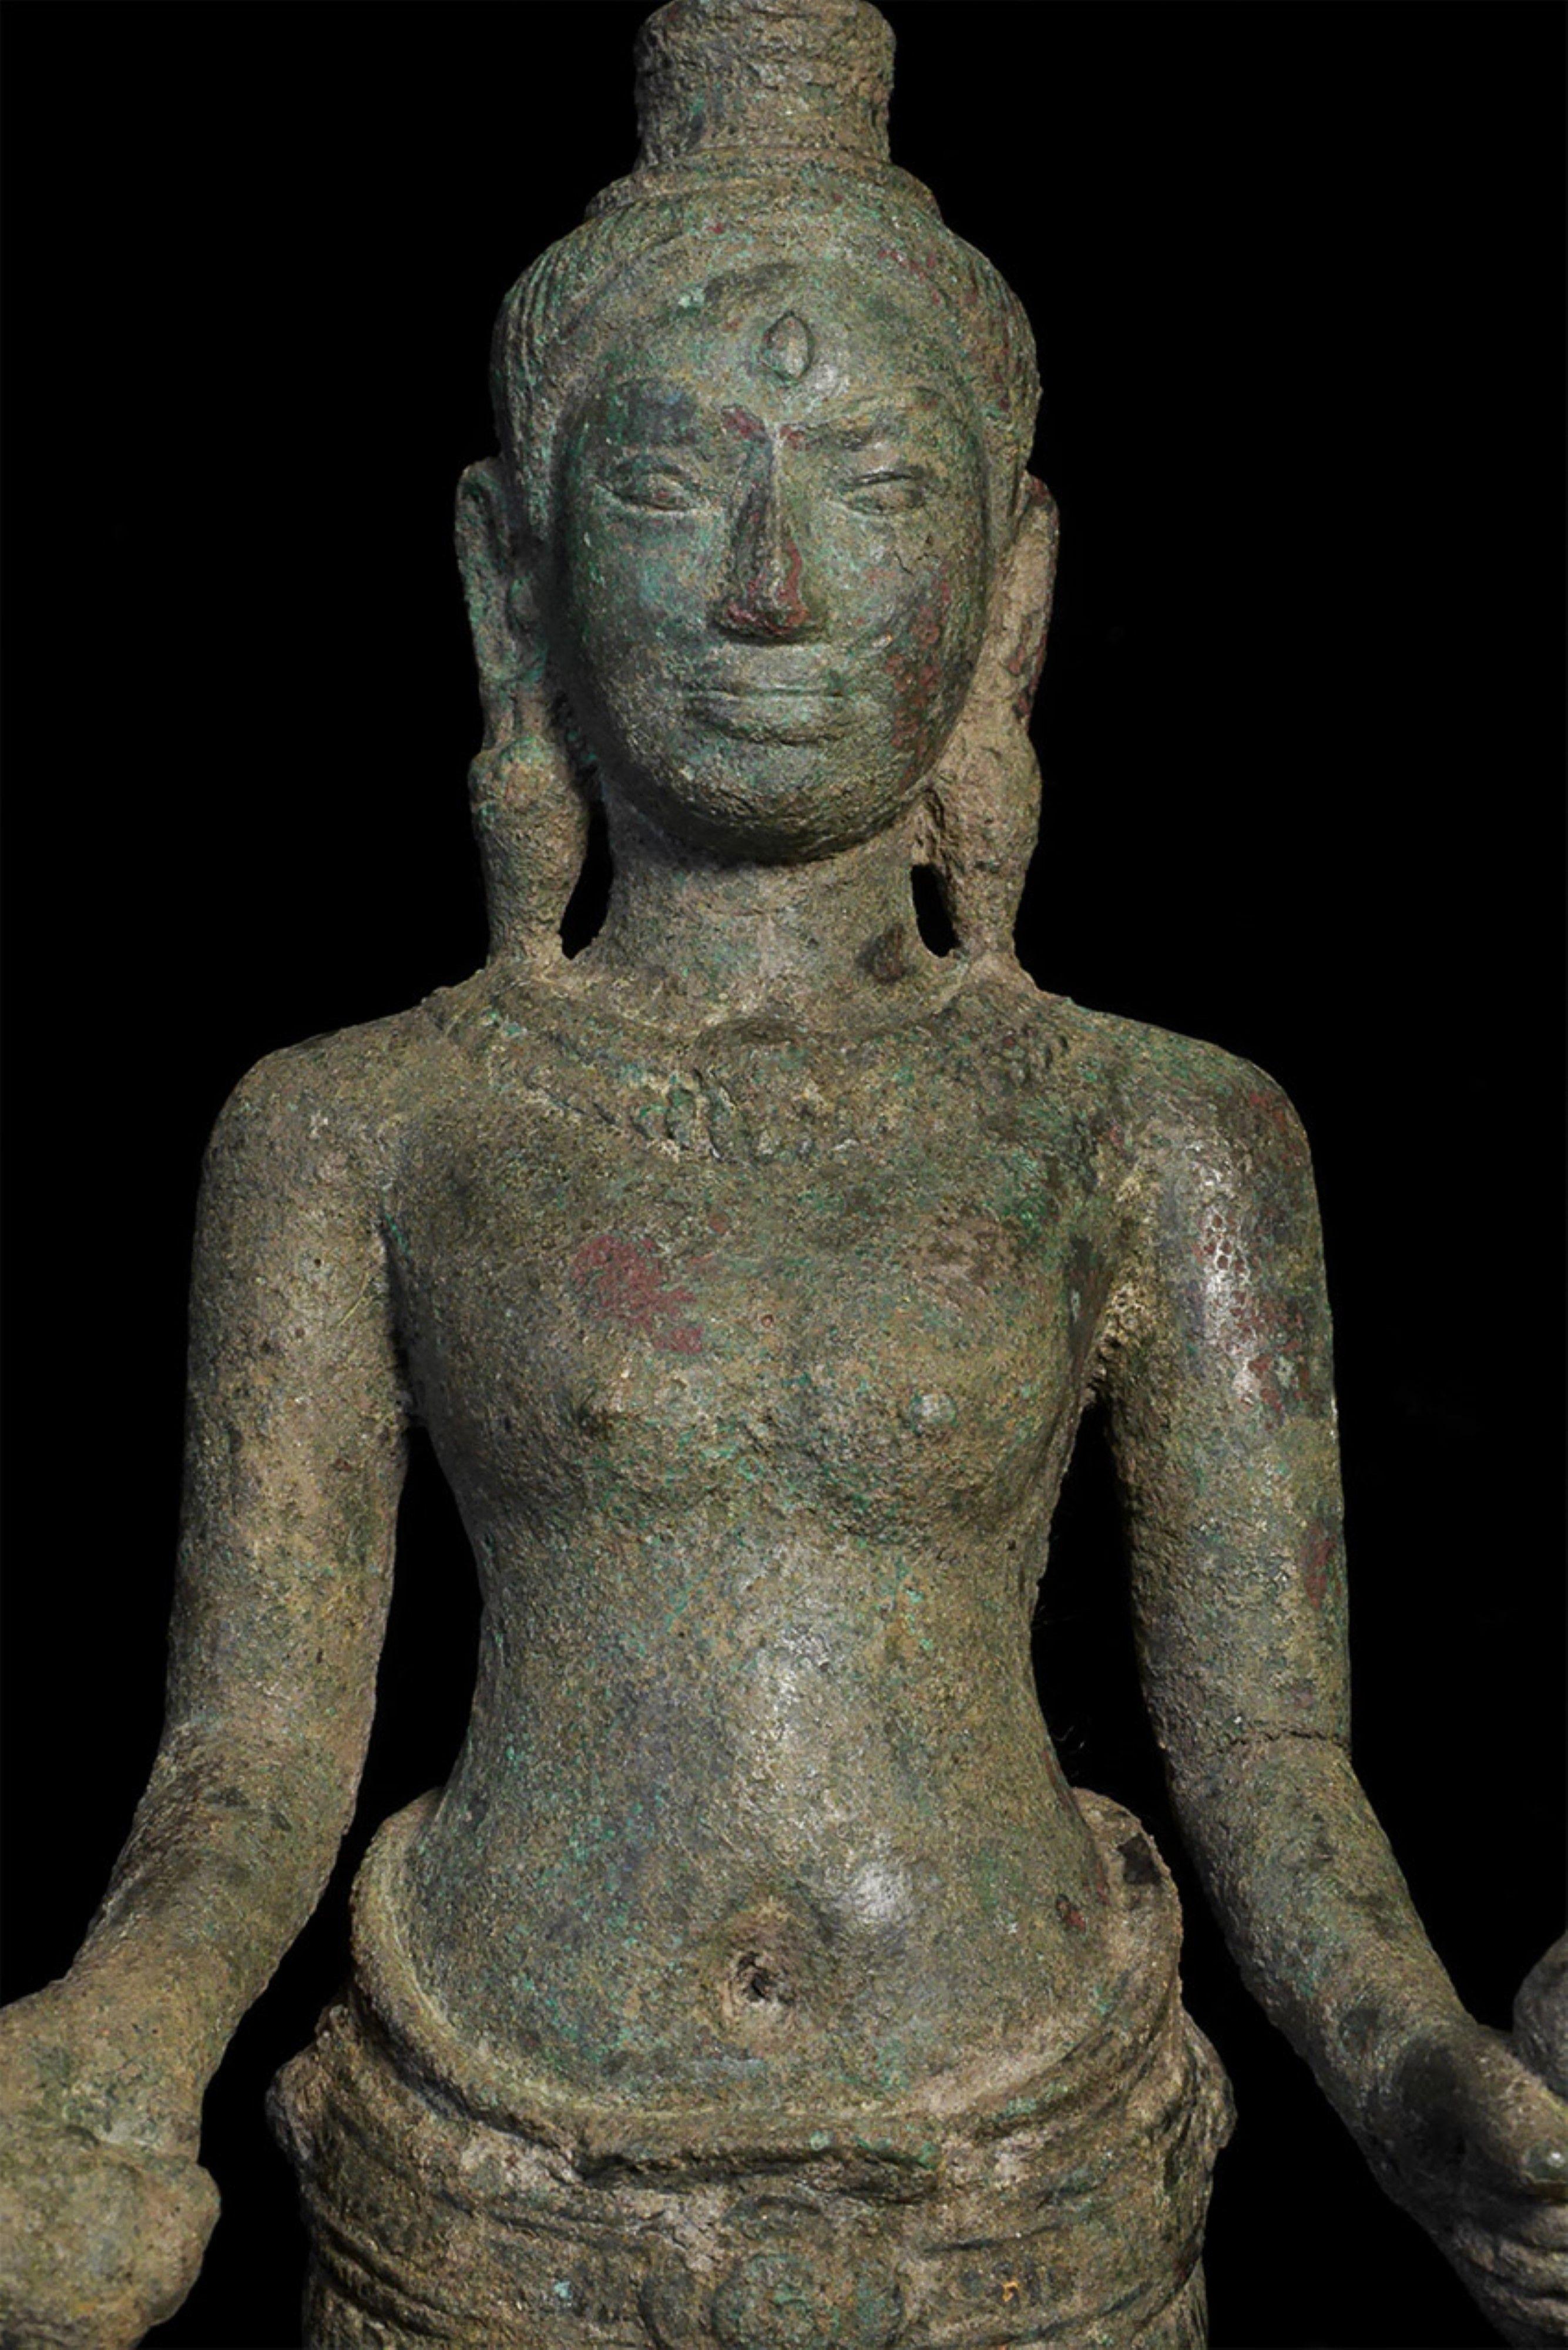 Very fine 11-13thC Cambodian Uma statue. Beautiful face, and strong spiritual presence. Left arm shows where it was originally attached during manufacture. It is only noticeable upon close inspection. Quite large for its type at 10.25